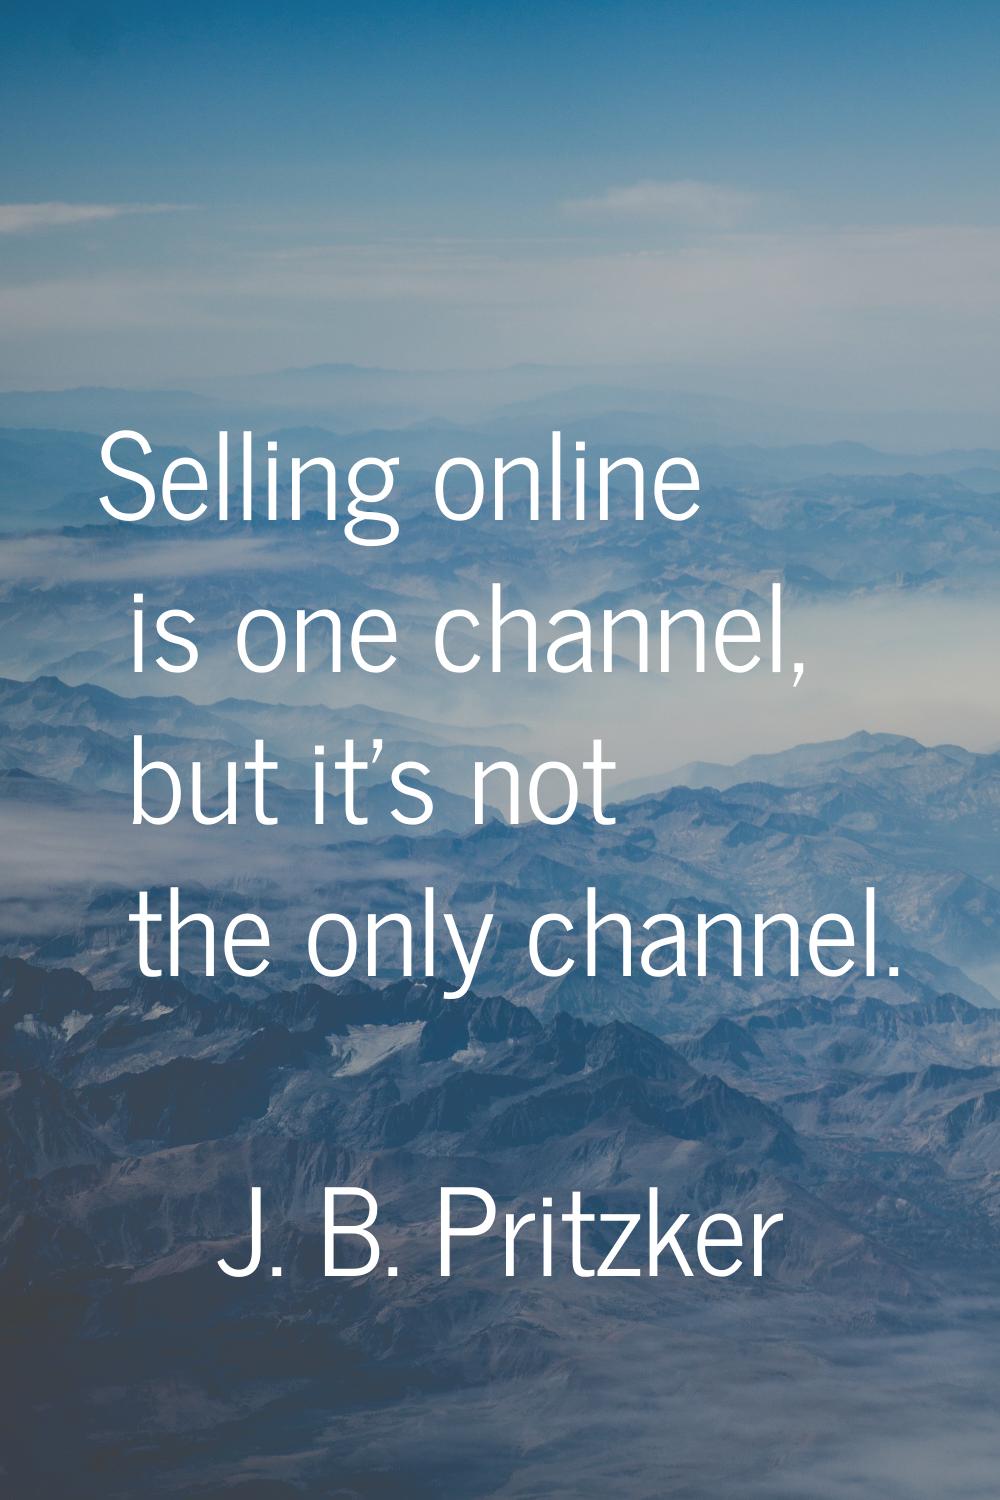 Selling online is one channel, but it's not the only channel.